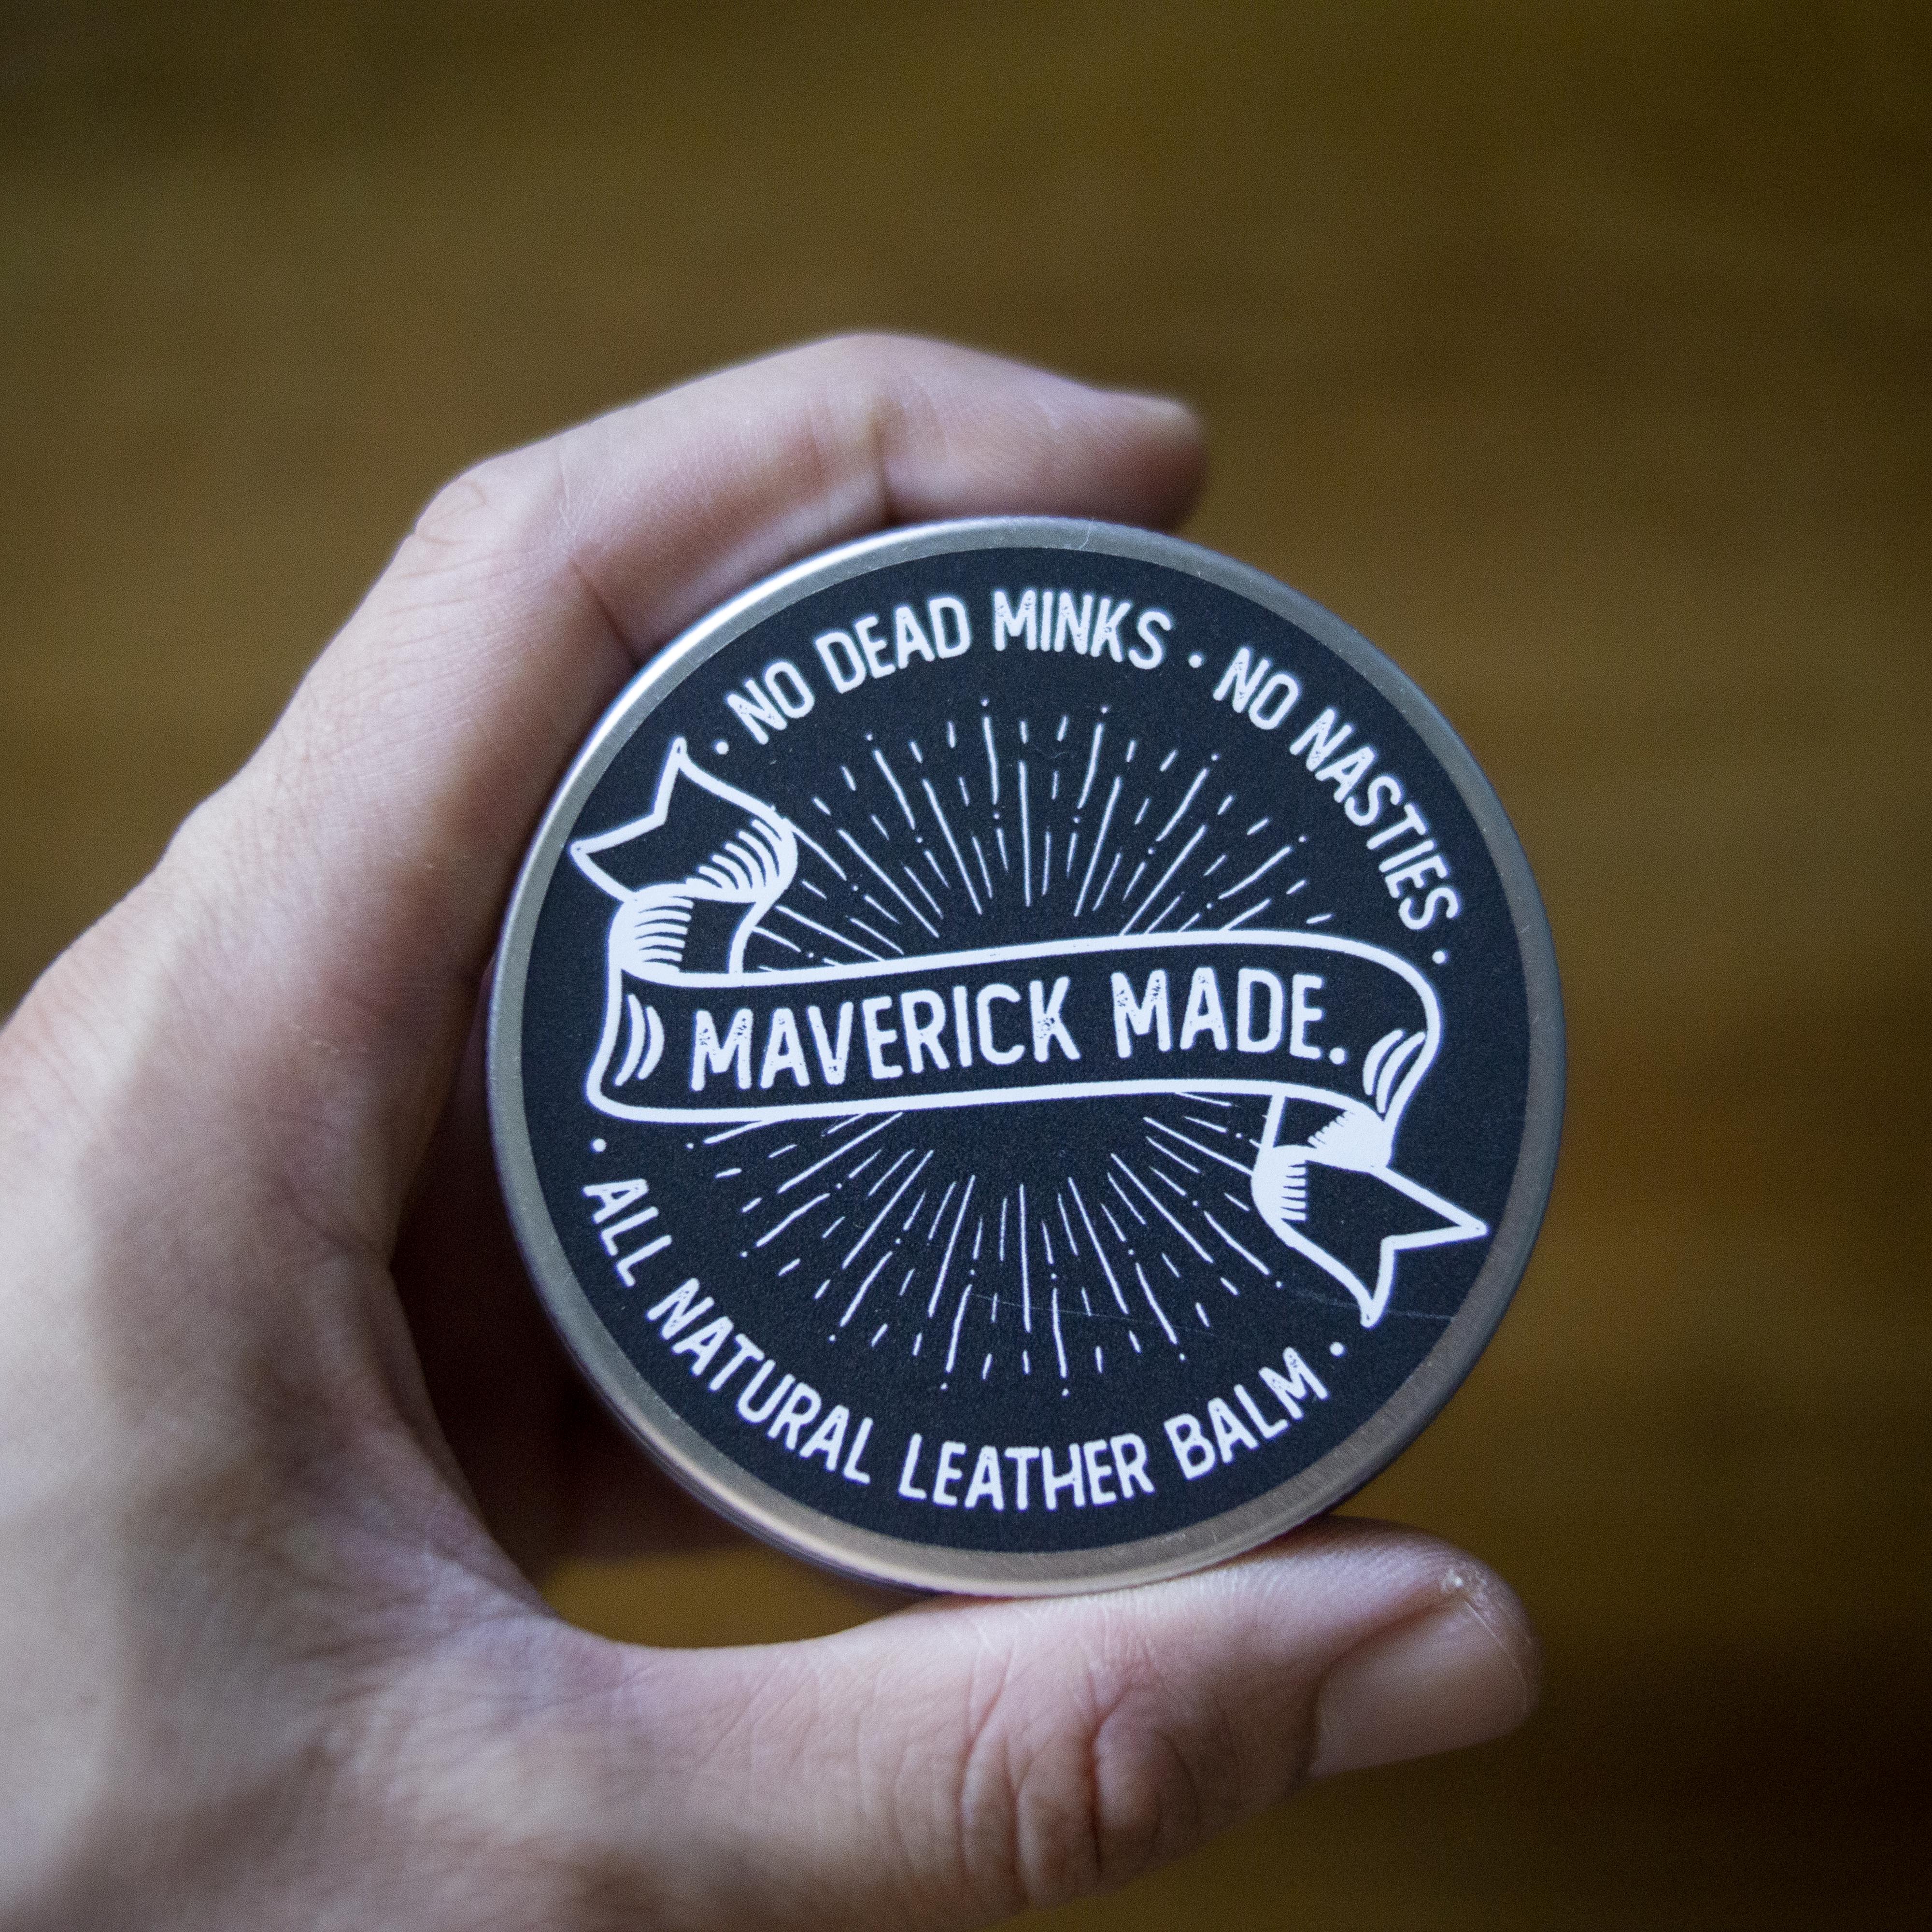 Maverick  Leather wax and leather cream for the best care